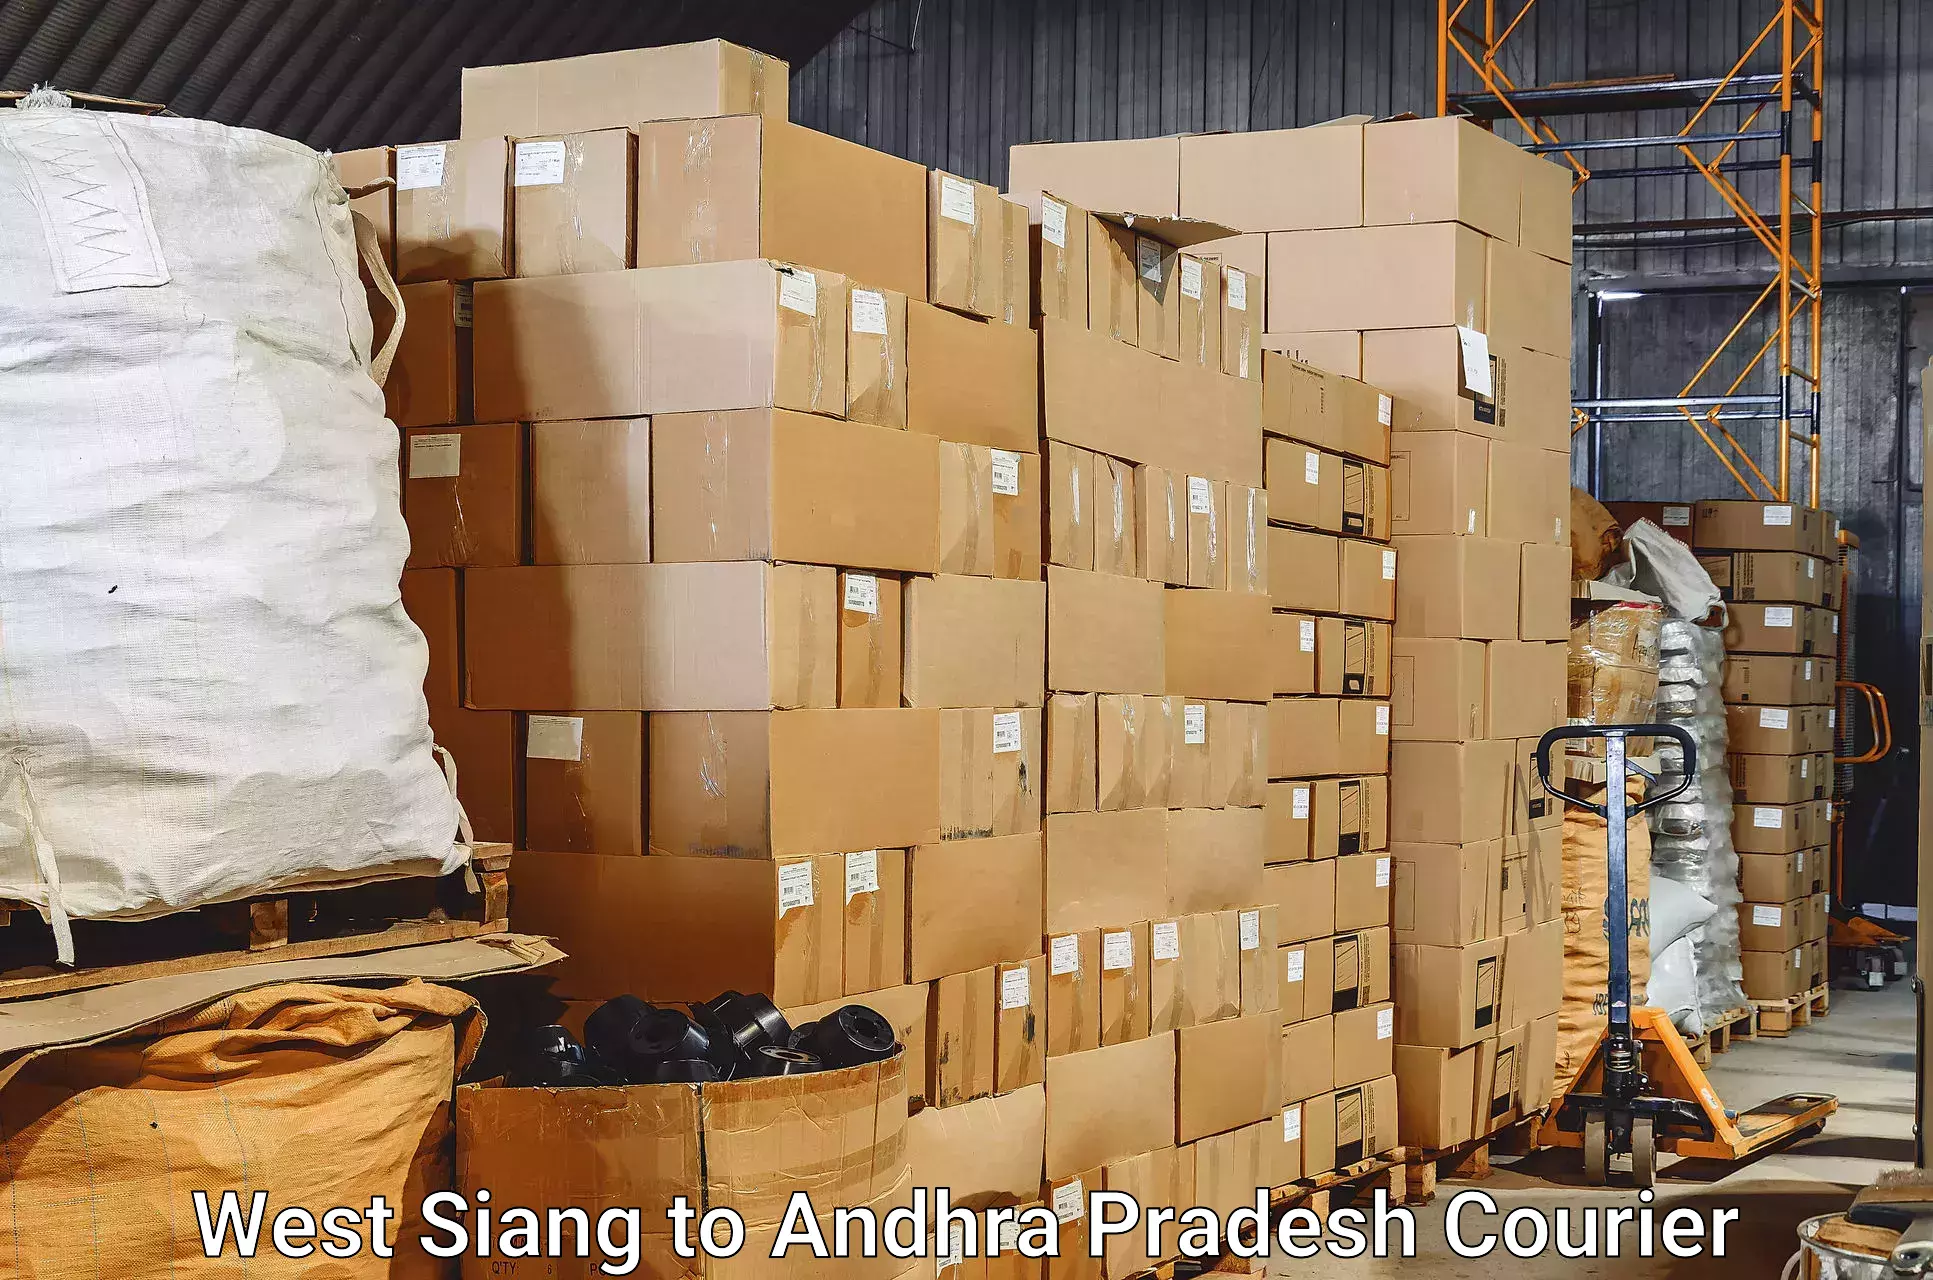 Baggage transport network West Siang to Bobbili